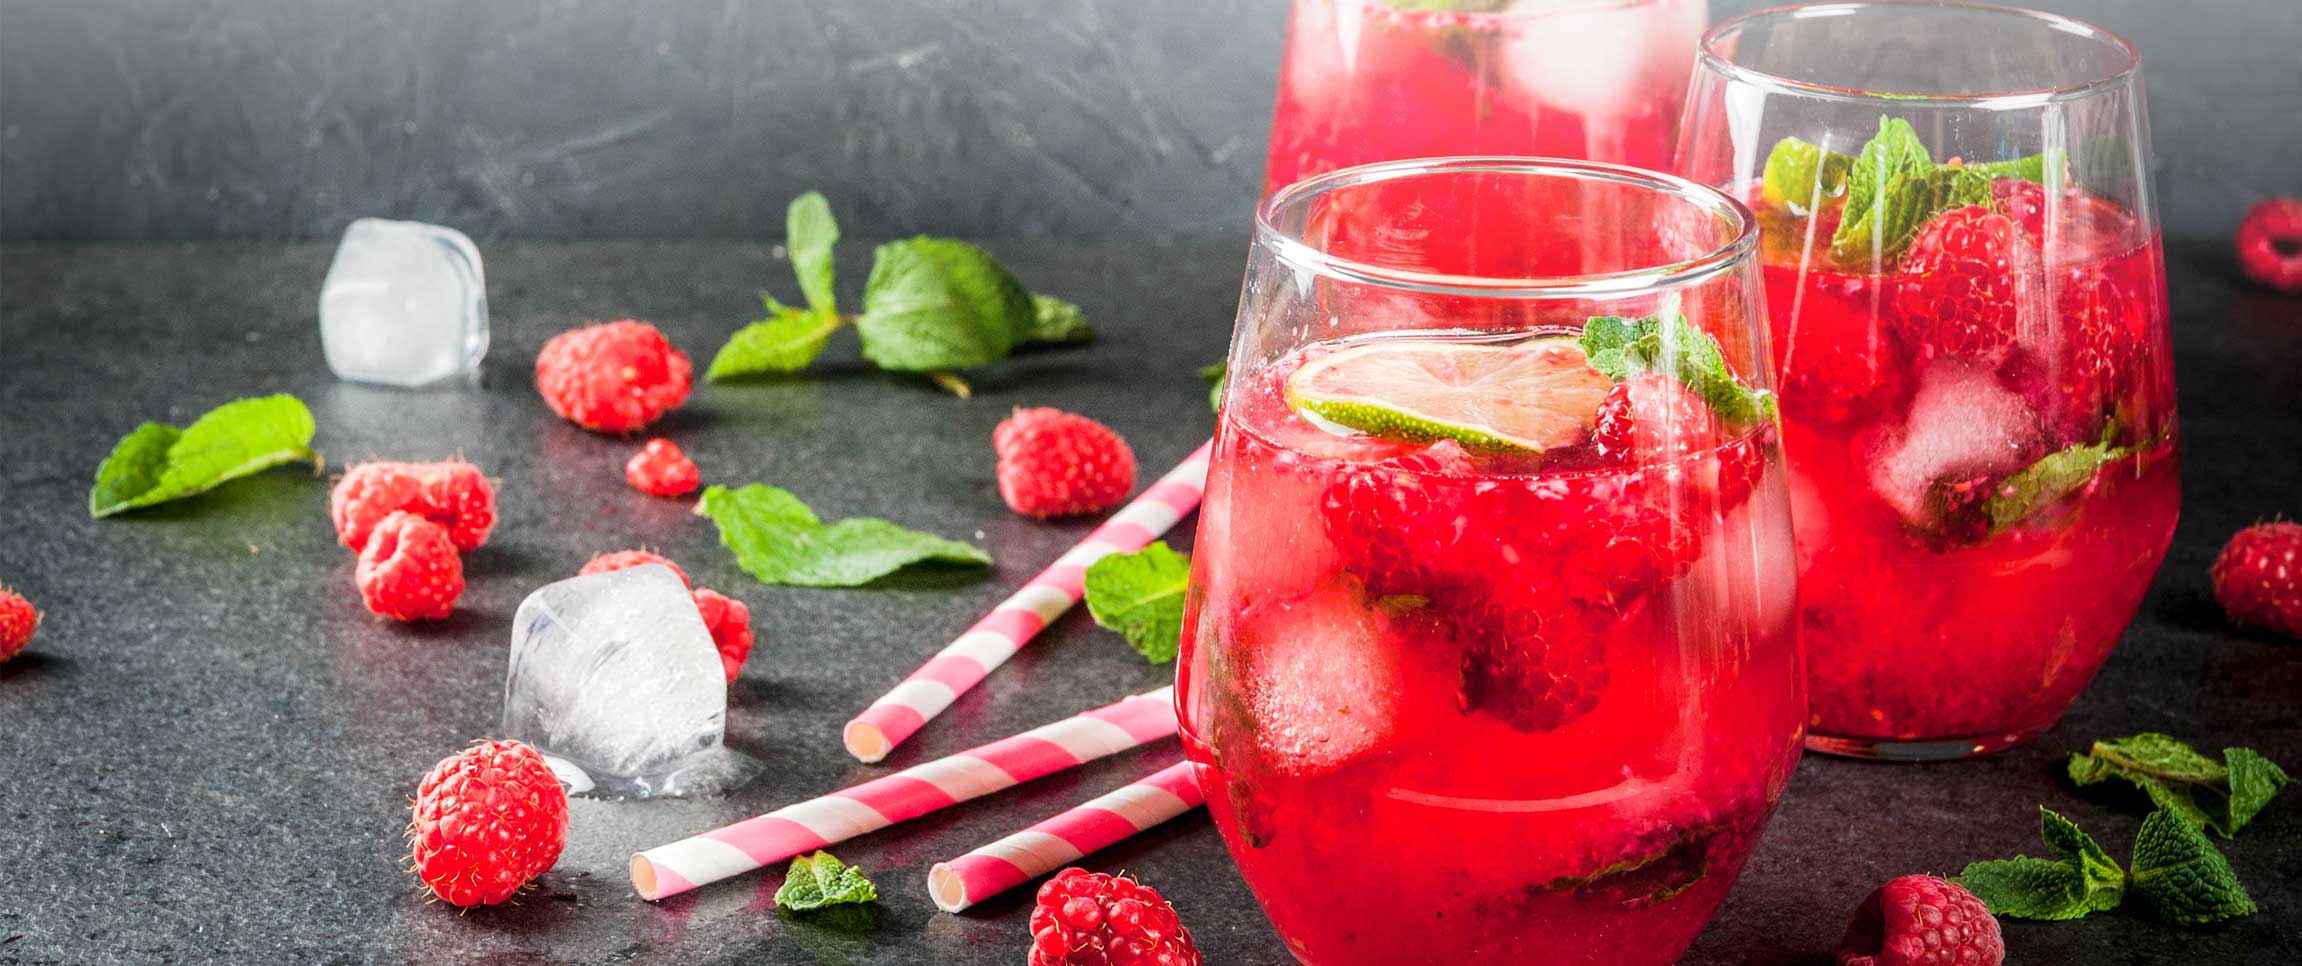 Red Wine Spritzer with Raspberries and Mint